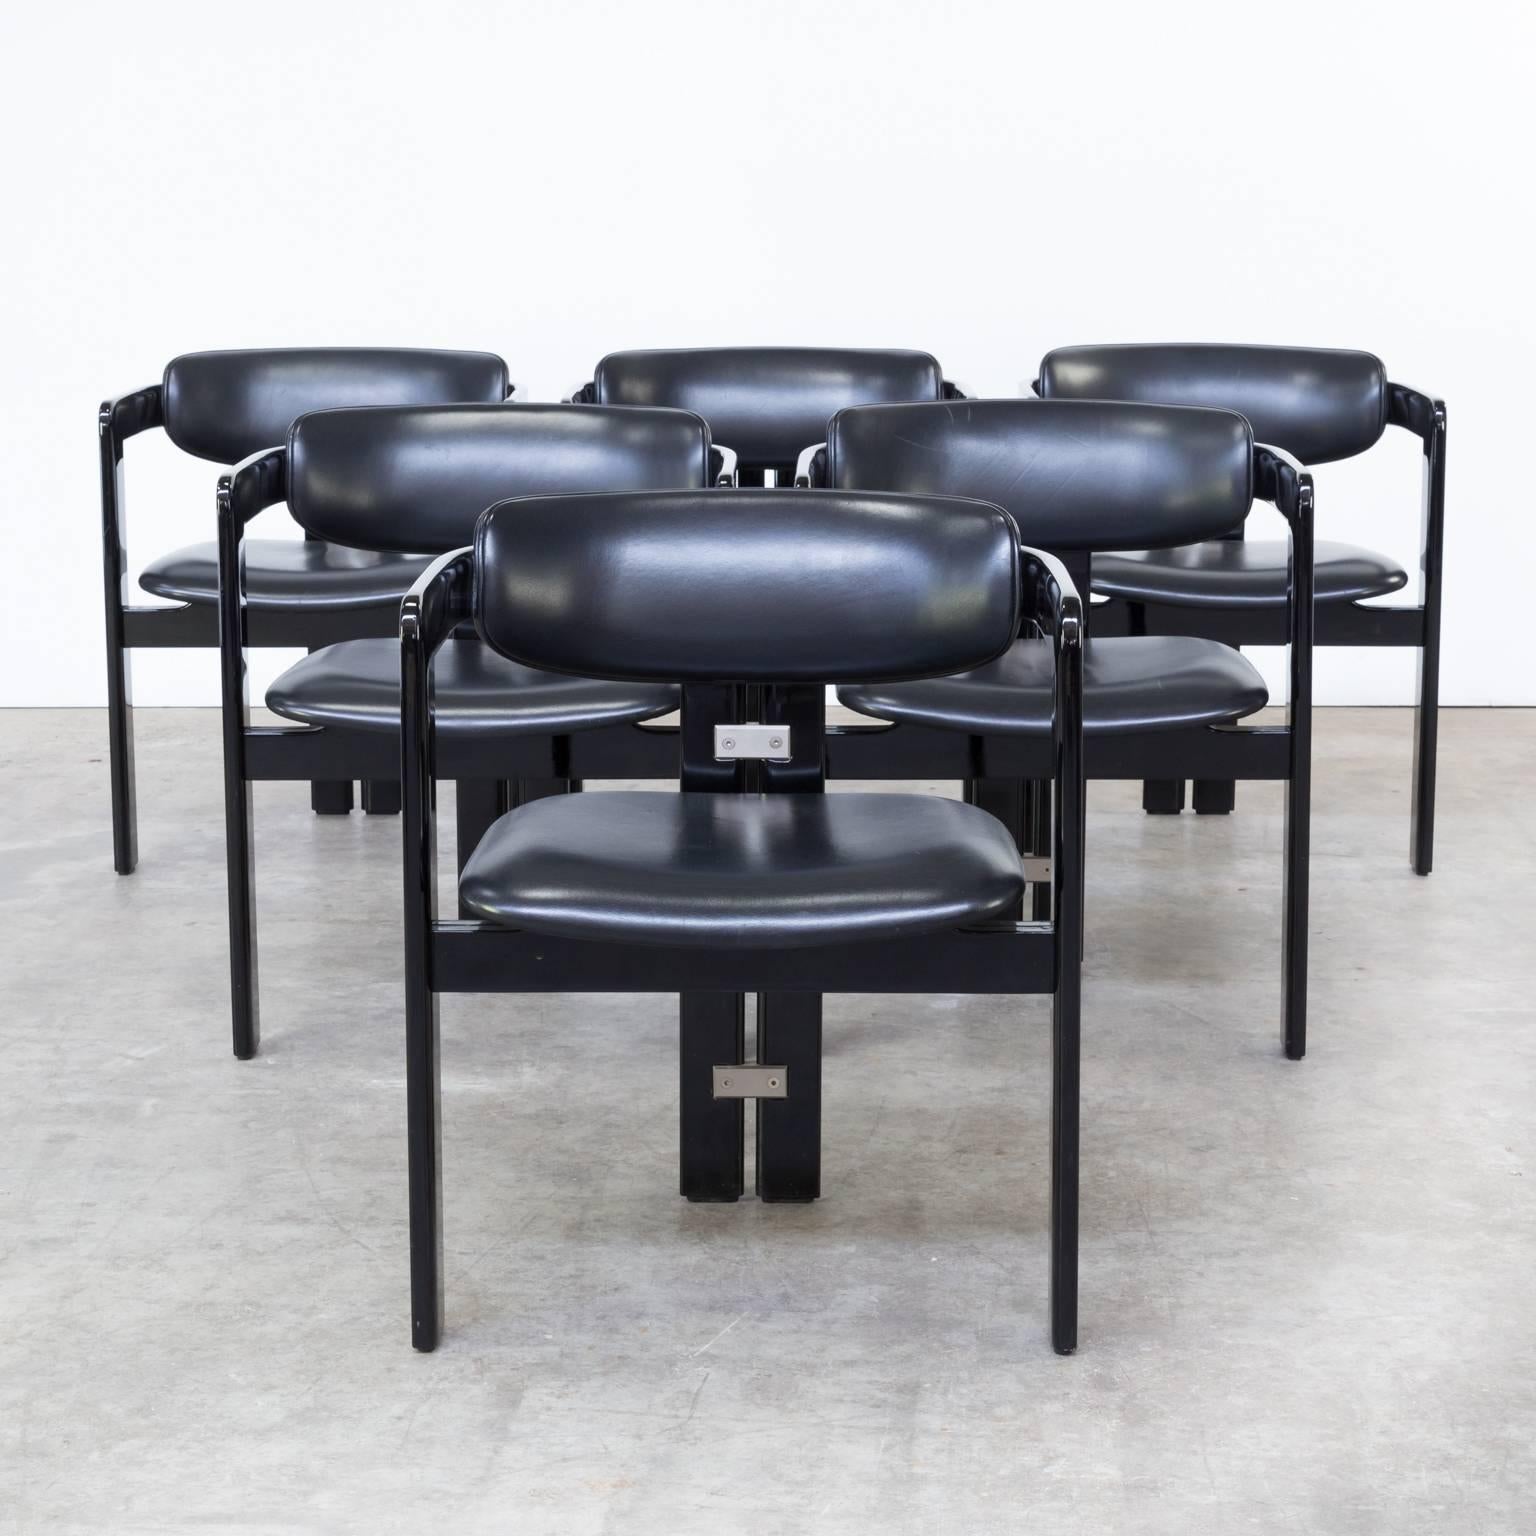 One set of six chairs. This chair was designed by Augusto Savini from the 1960s and manufactured by Pozzi, in Italy. It is covered in its original black leatherette and it features a black piano lacquered frame and aluminium metal connections. The